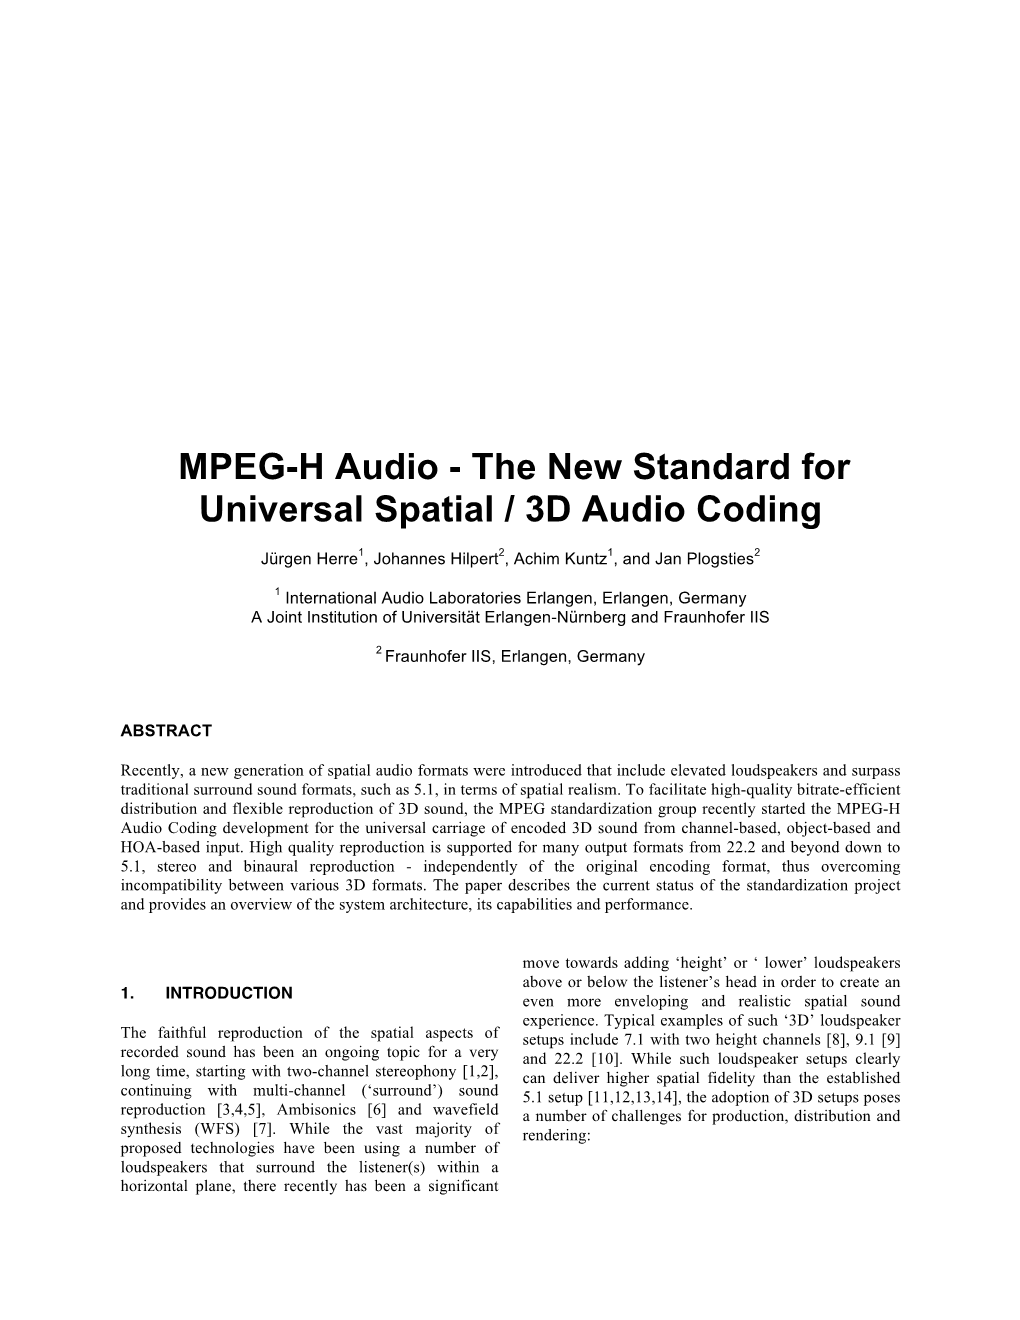 MPEG-H Audio - the New Standard for Universal Spatial / 3D Audio Coding